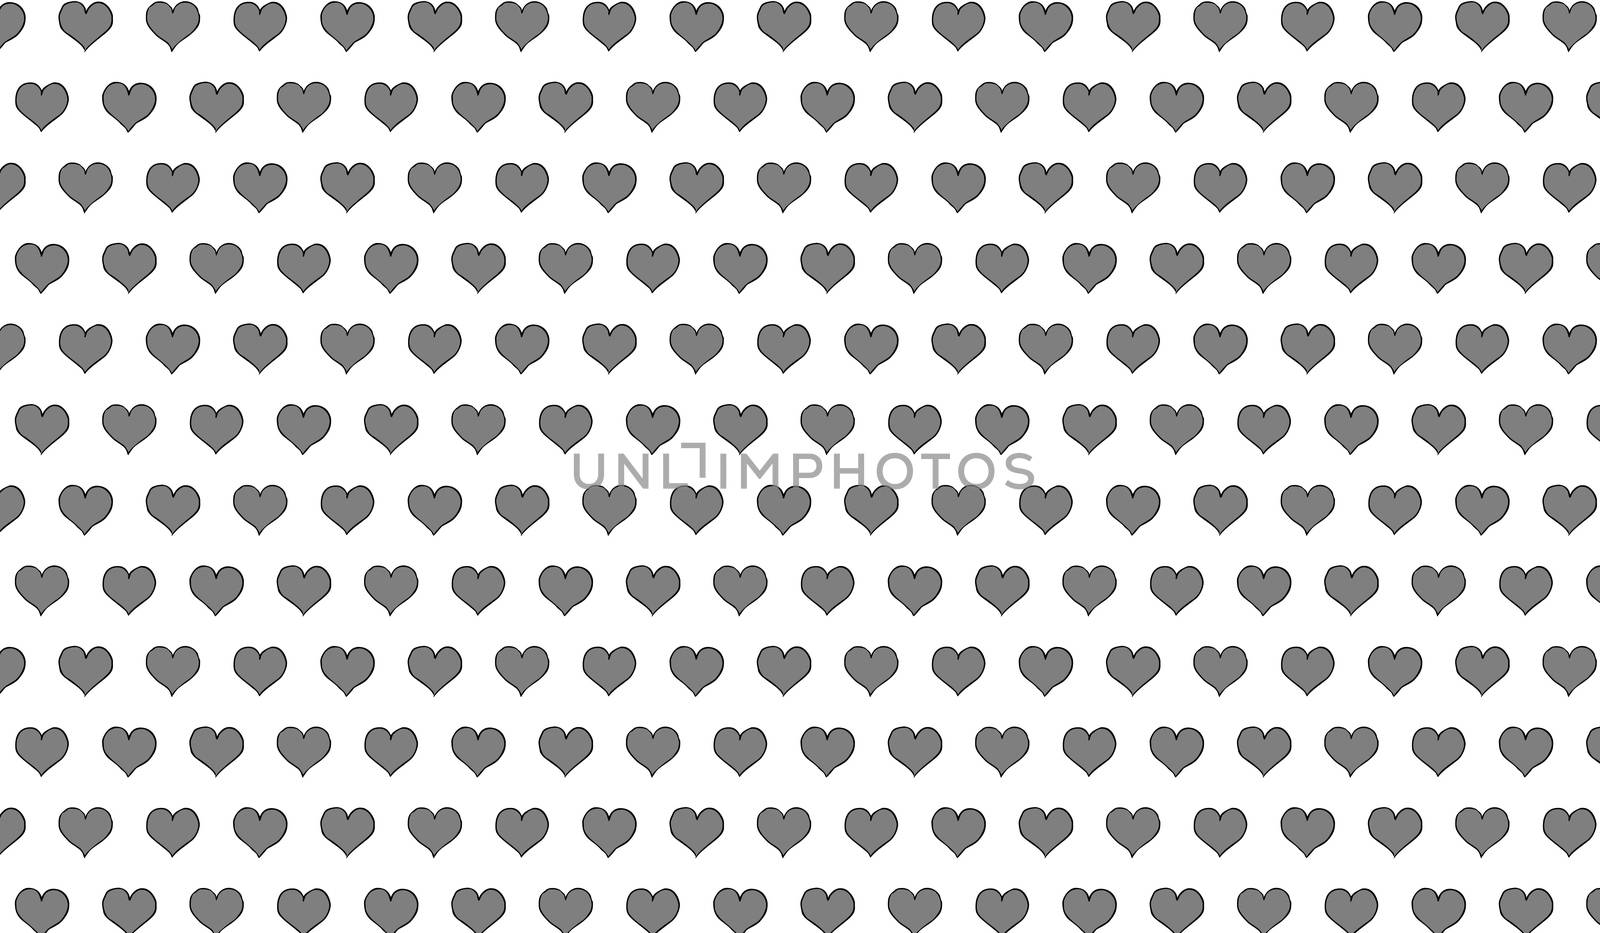 2d grey pattern of cartoon hearts on isolated background by Andreajk3